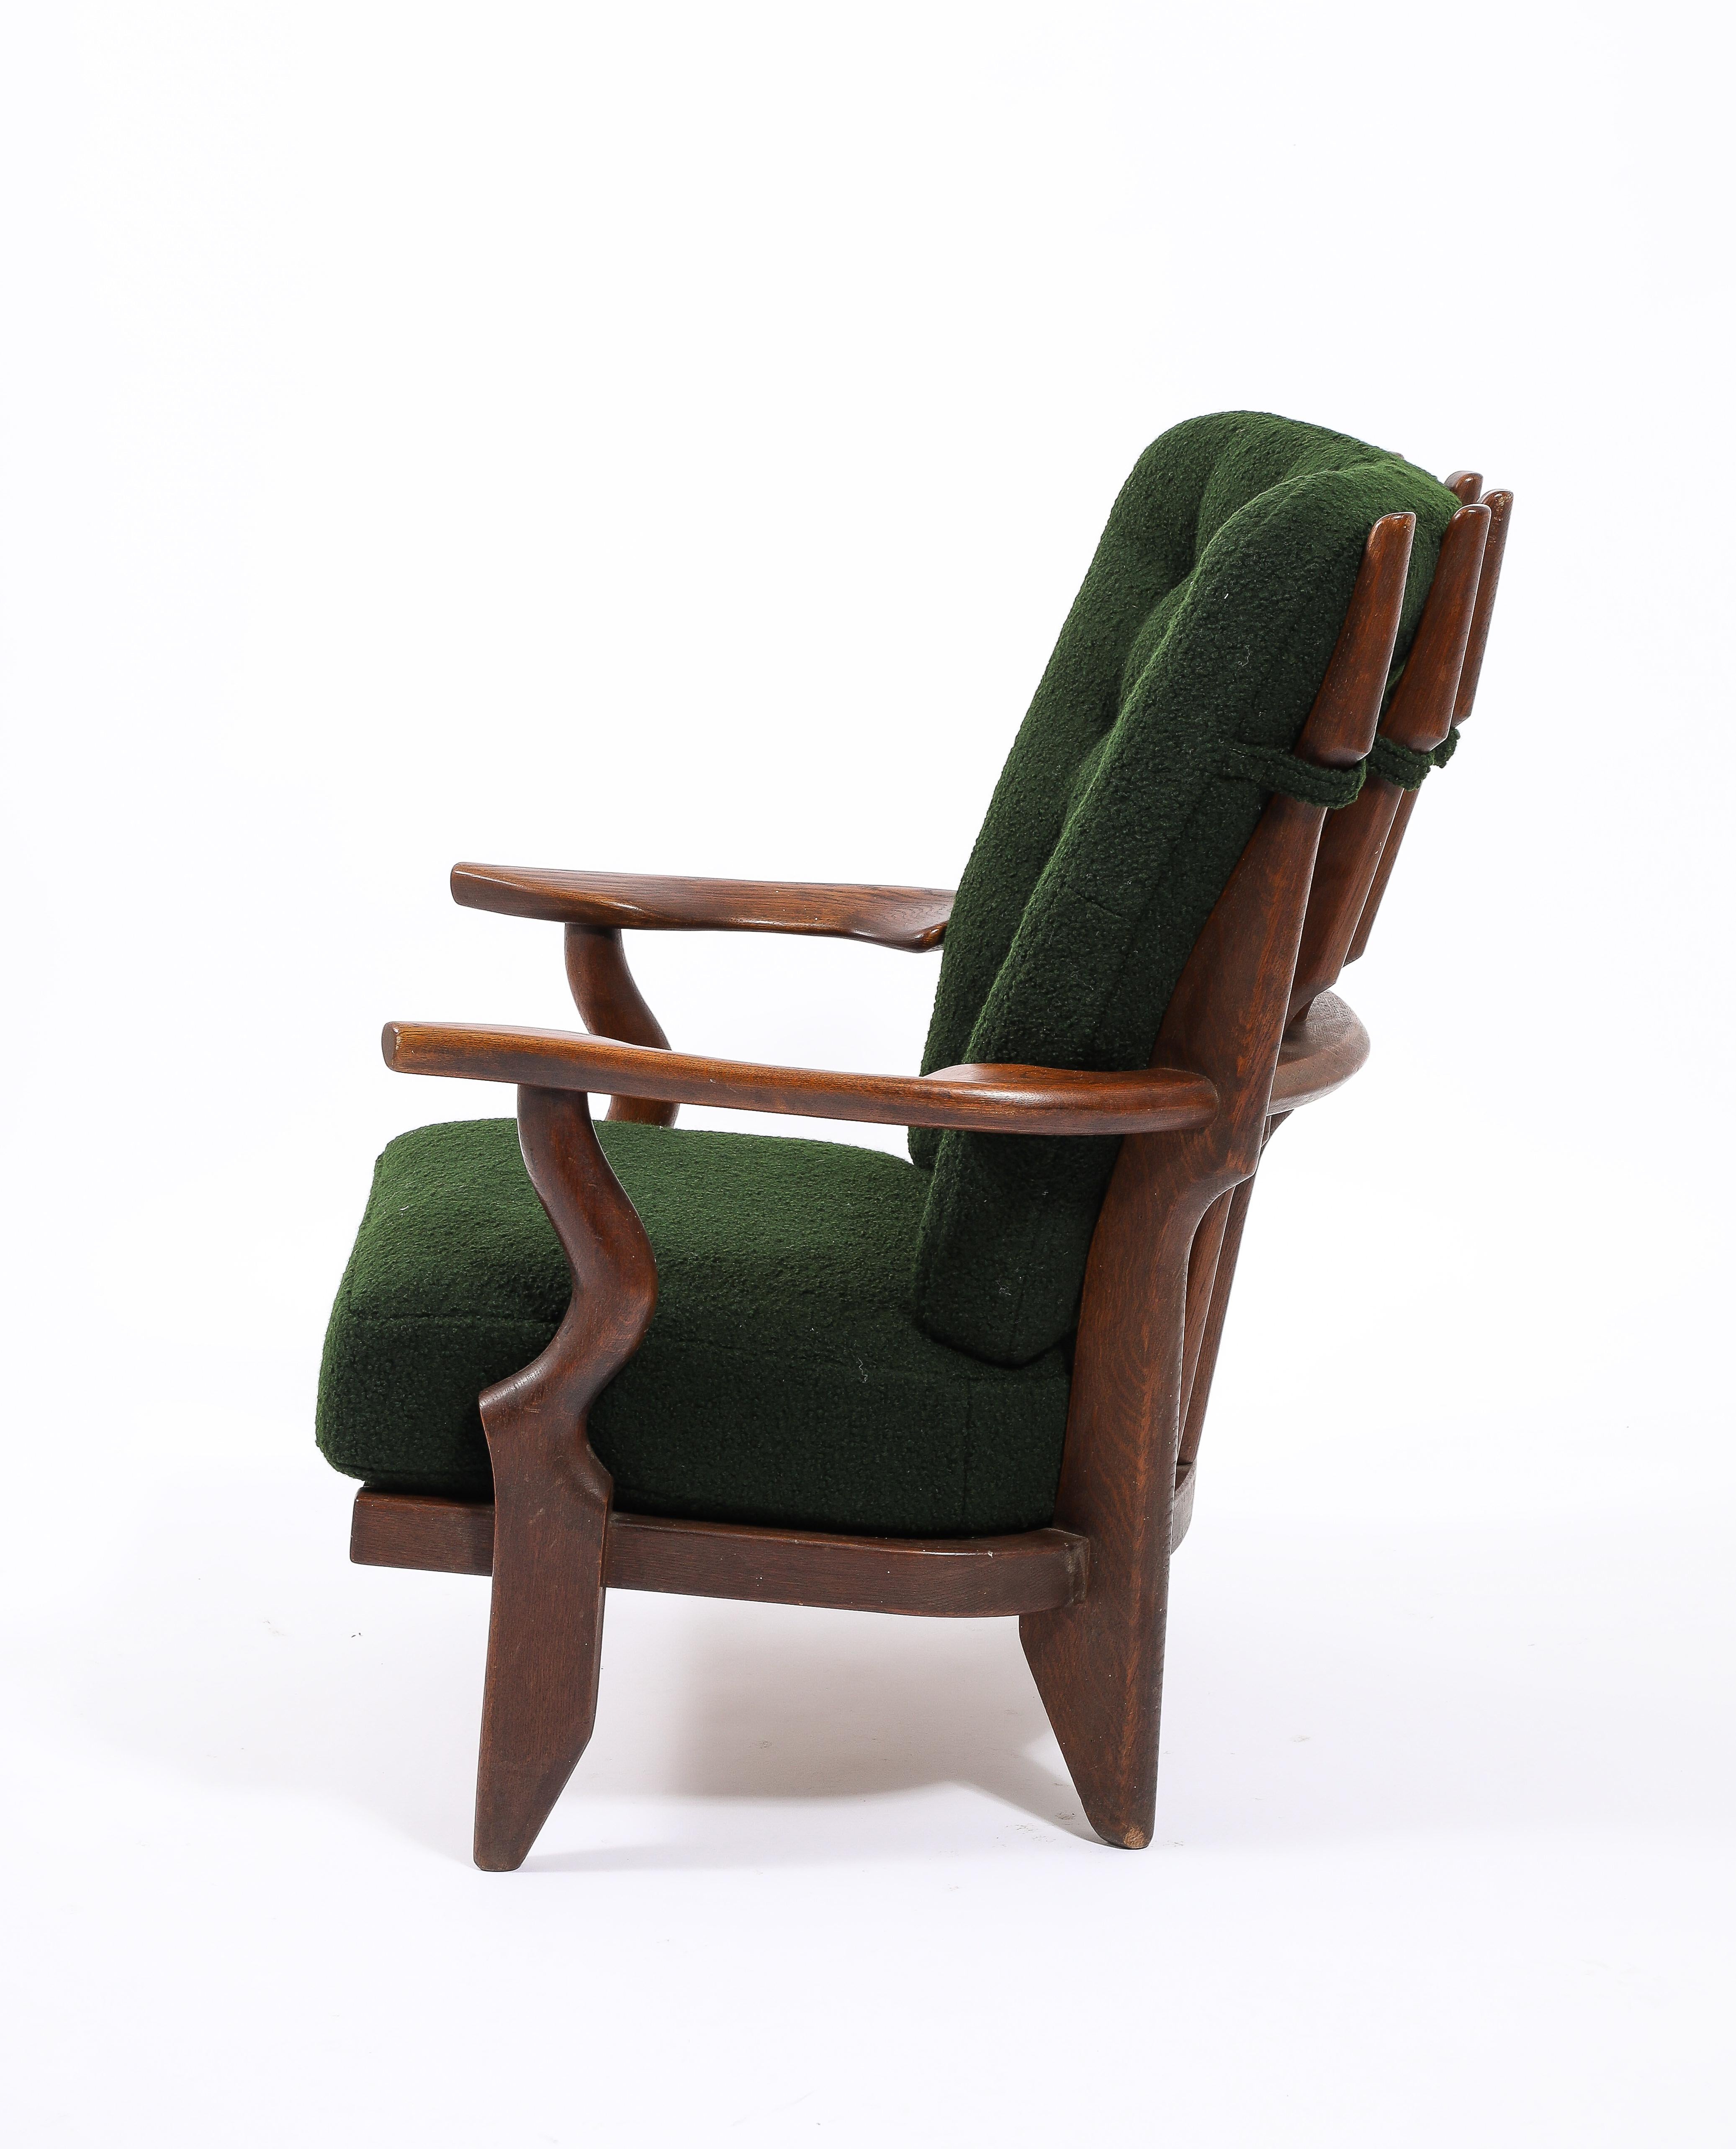 Hand-Carved Guillerme & Chambron Petit Repos Armchair in Green Bouclé, France 1950's For Sale